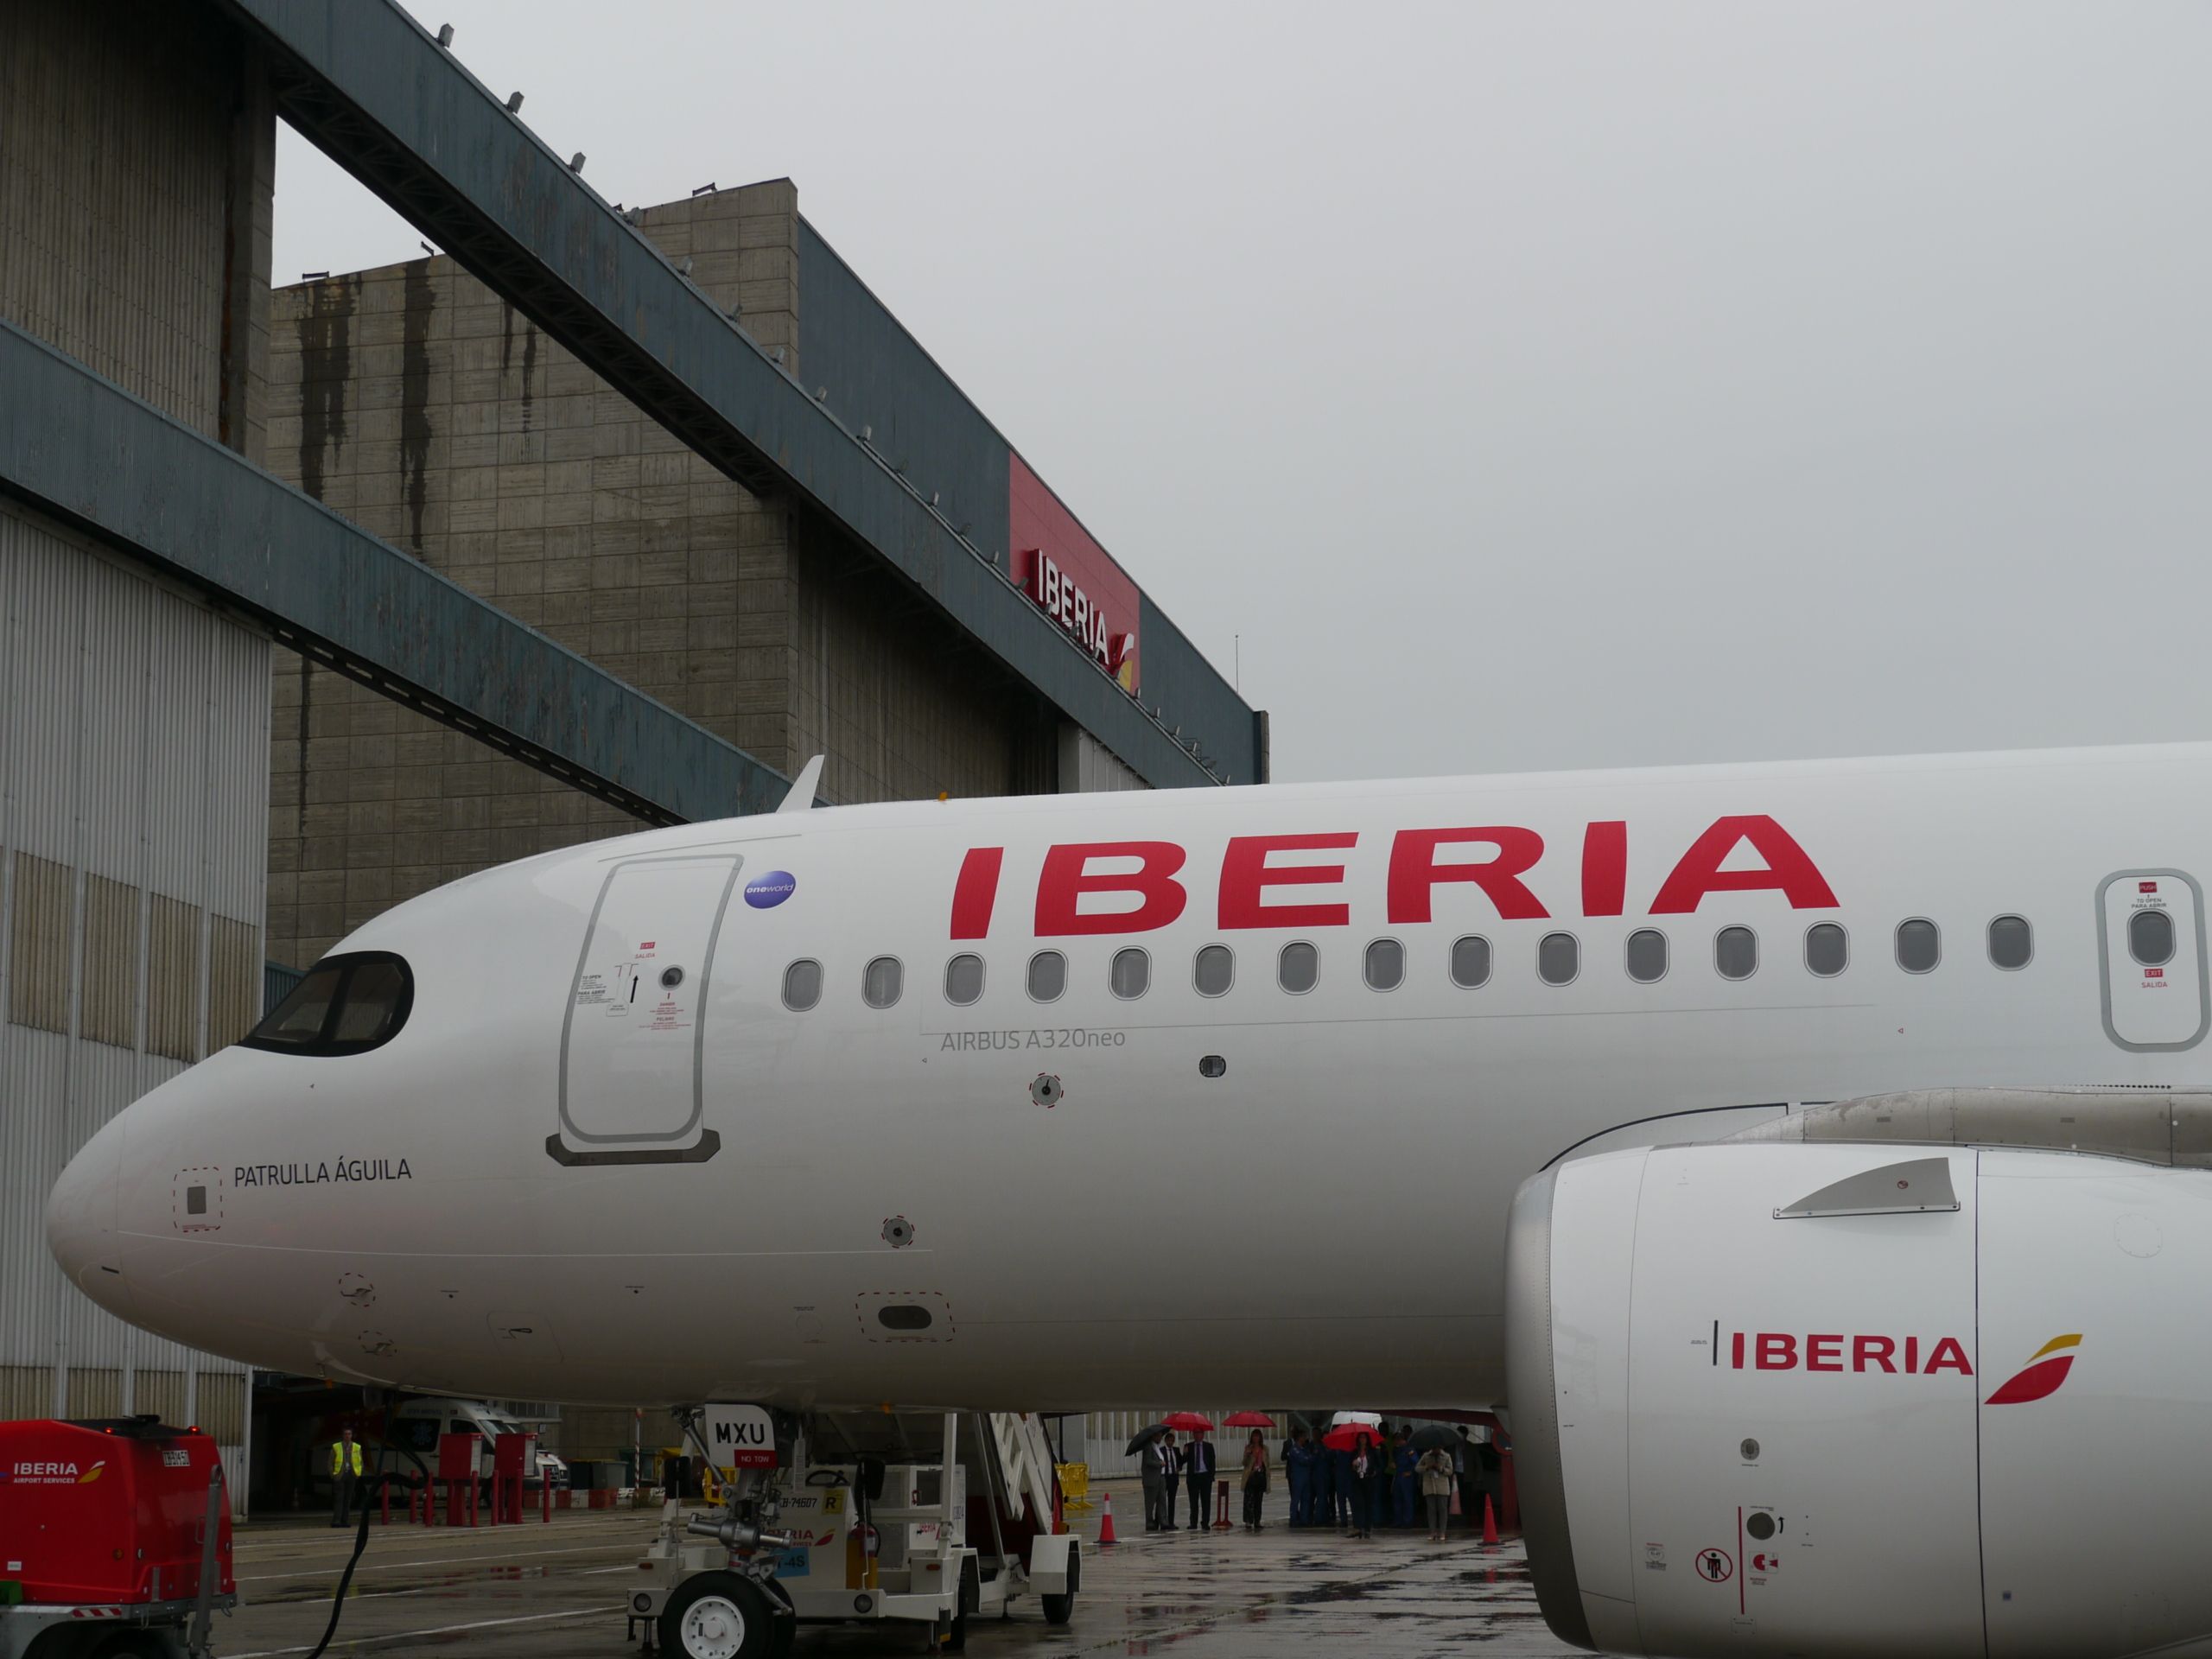 Baggage in the hold - Iberia USA